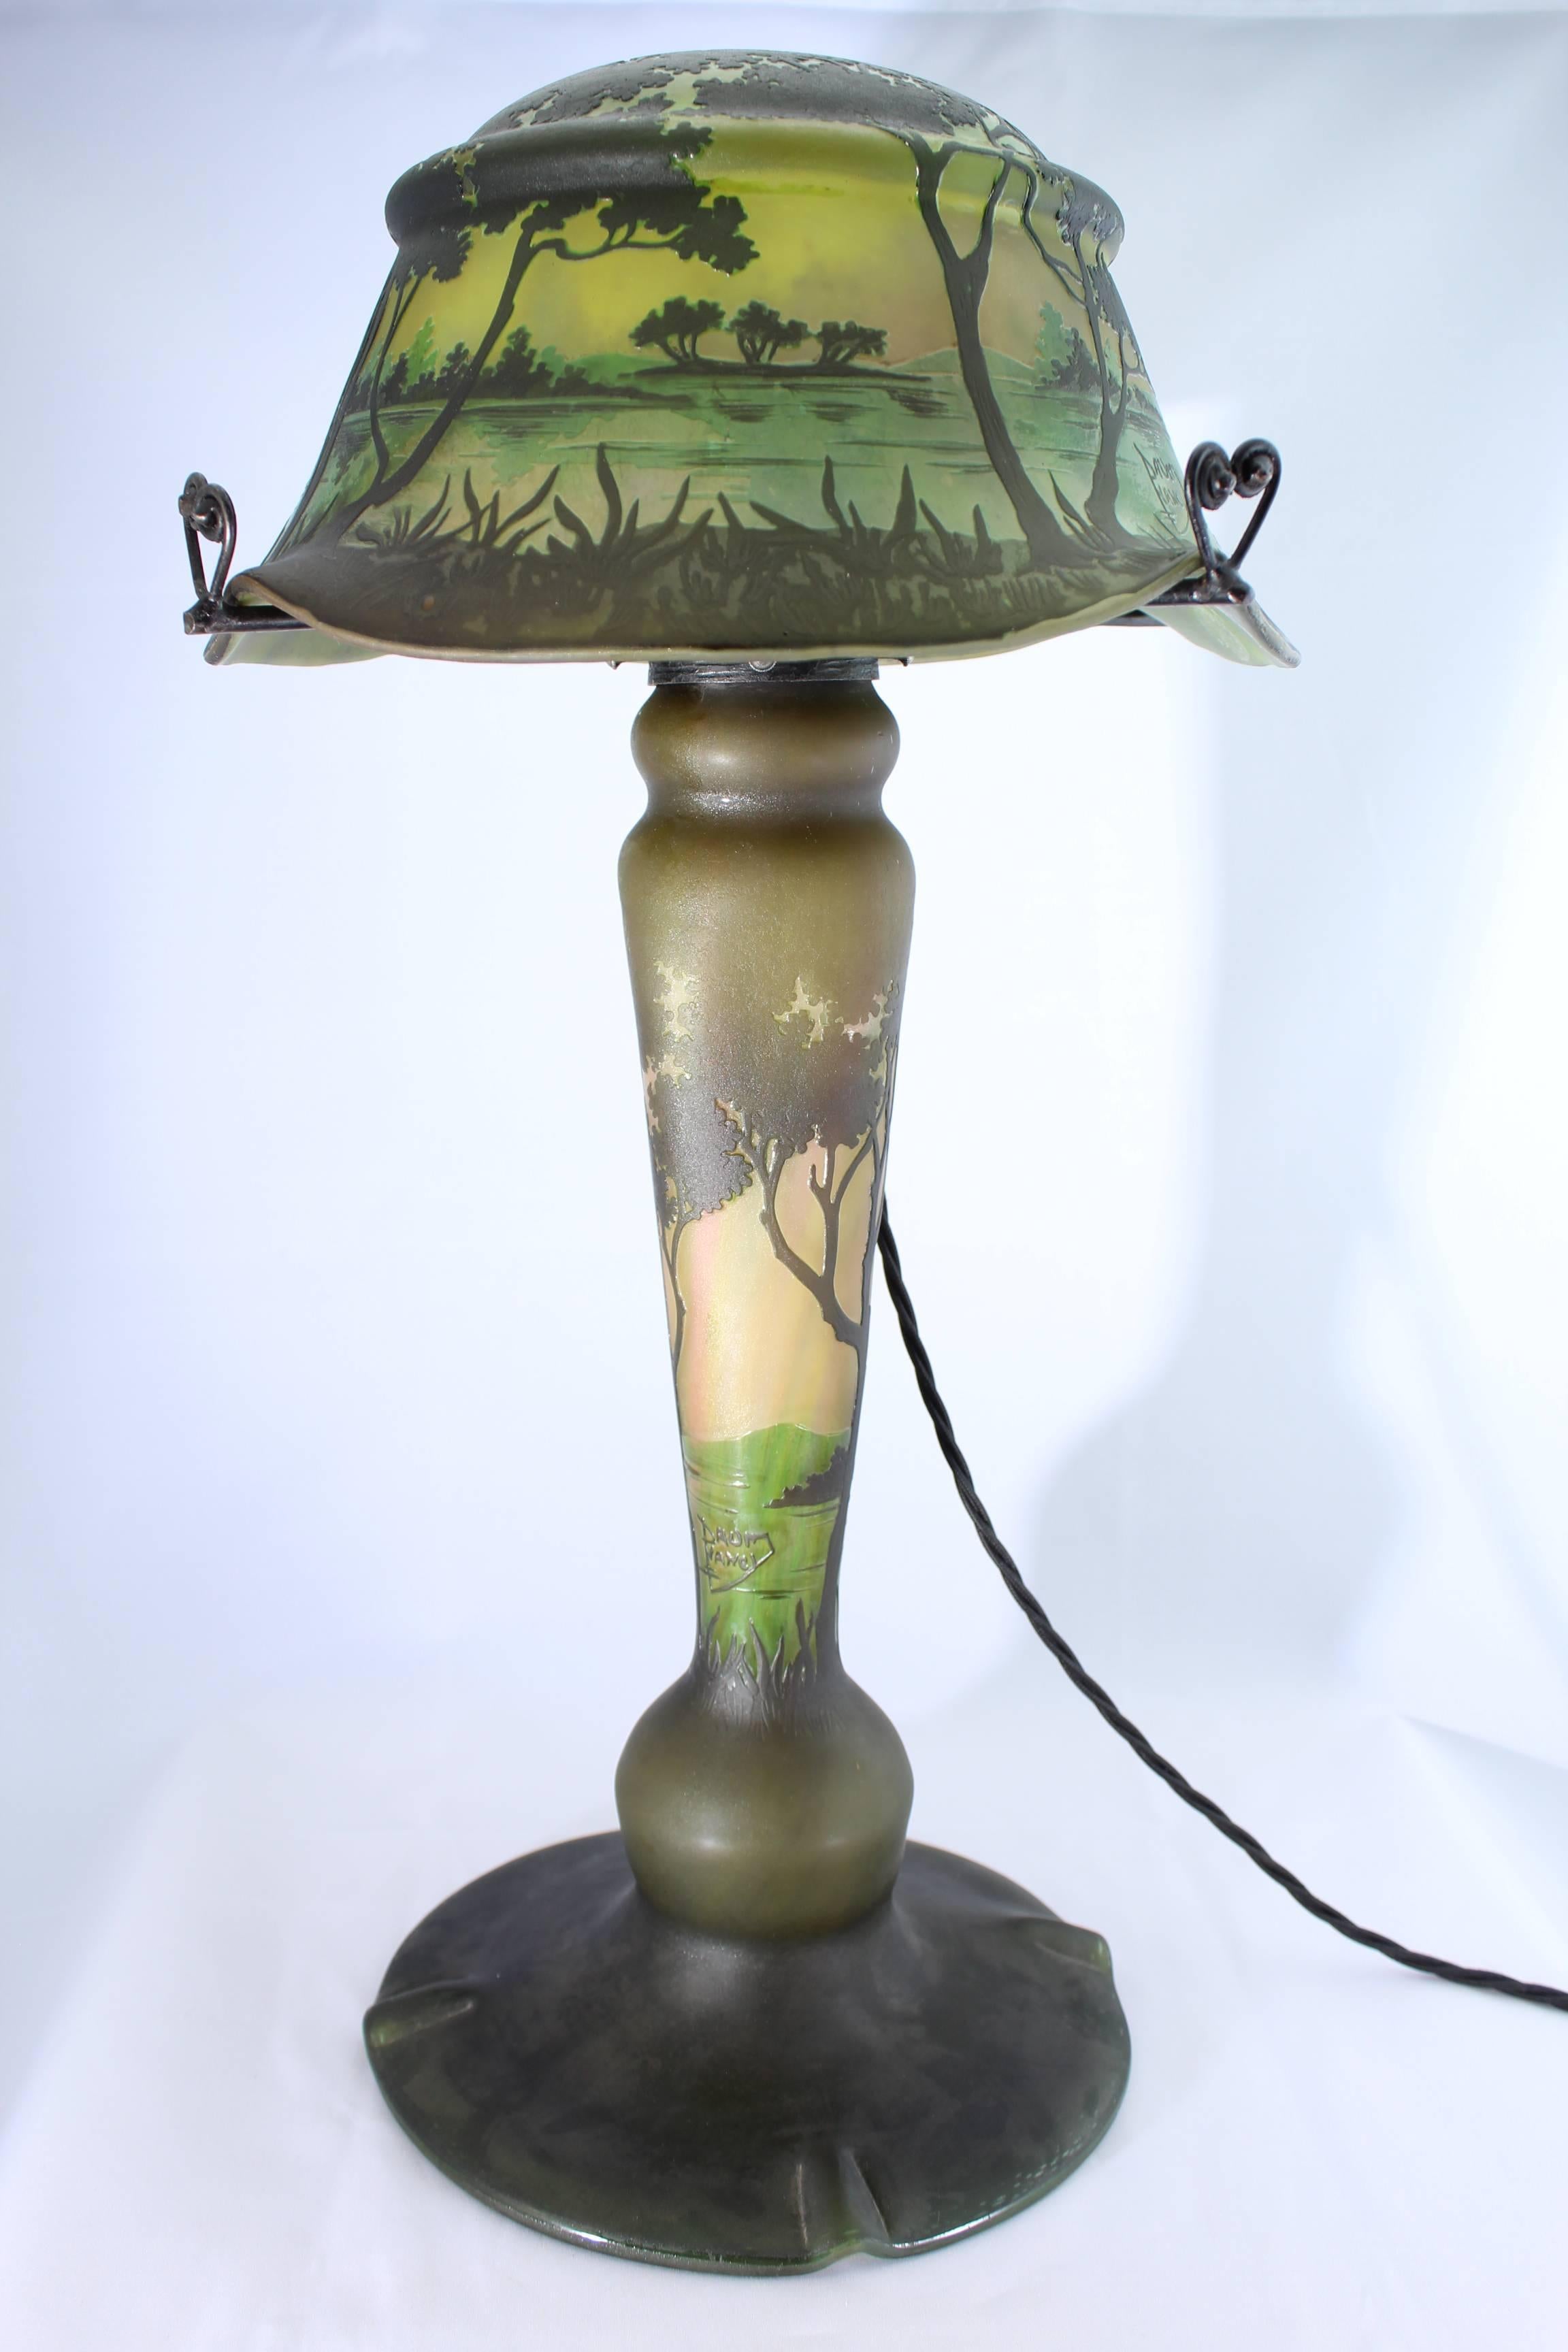 Large and decorative Art Nouveau mushroom lamp by Daum Freres of Nancy, circa 1900. This lamp 20 years ago would have went for $60,000. Rare and important. Land scape in greens, browns, creams and yellows acid etched and carved. Two light fixture